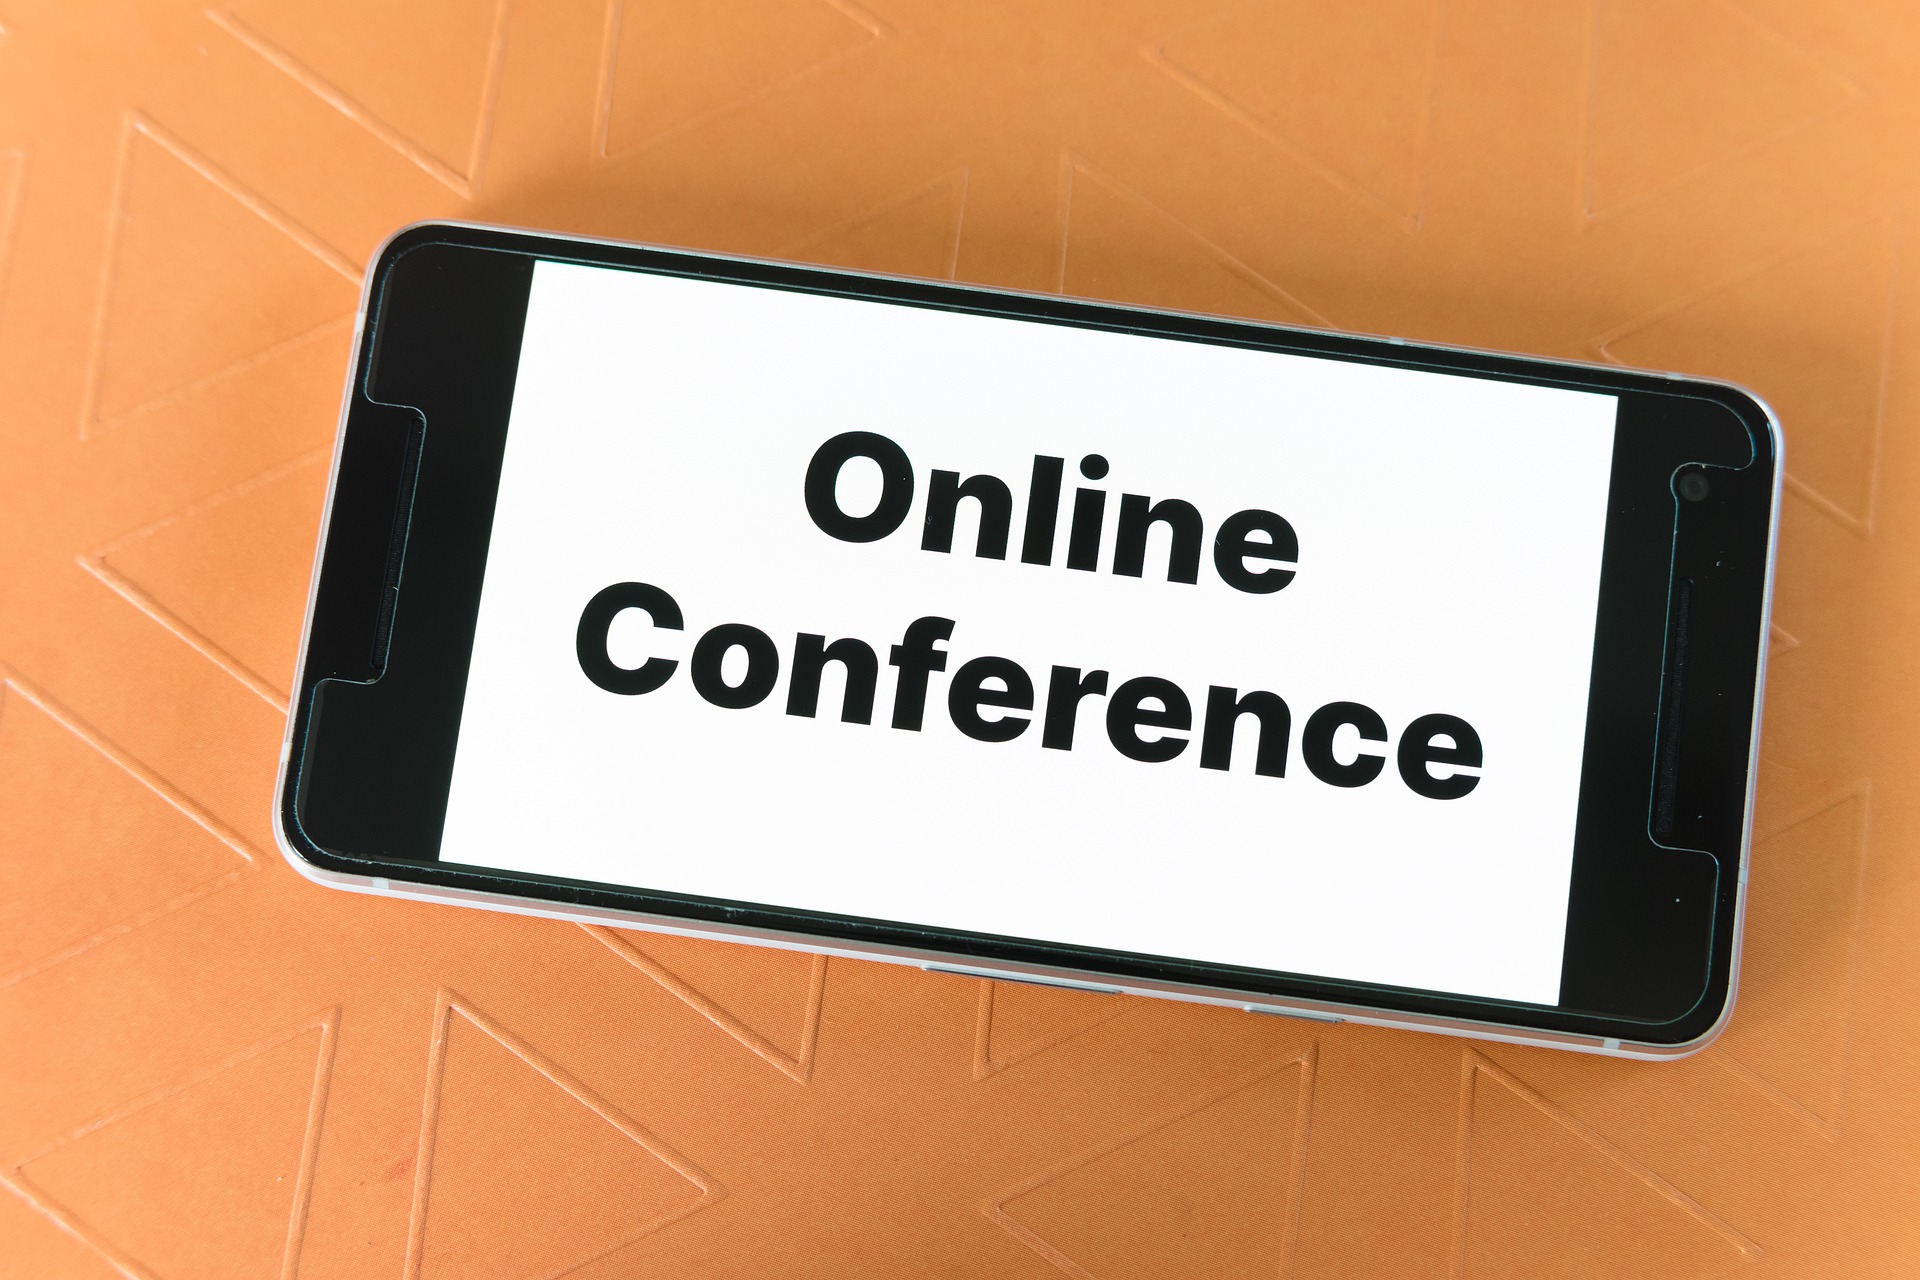 AALL online conference